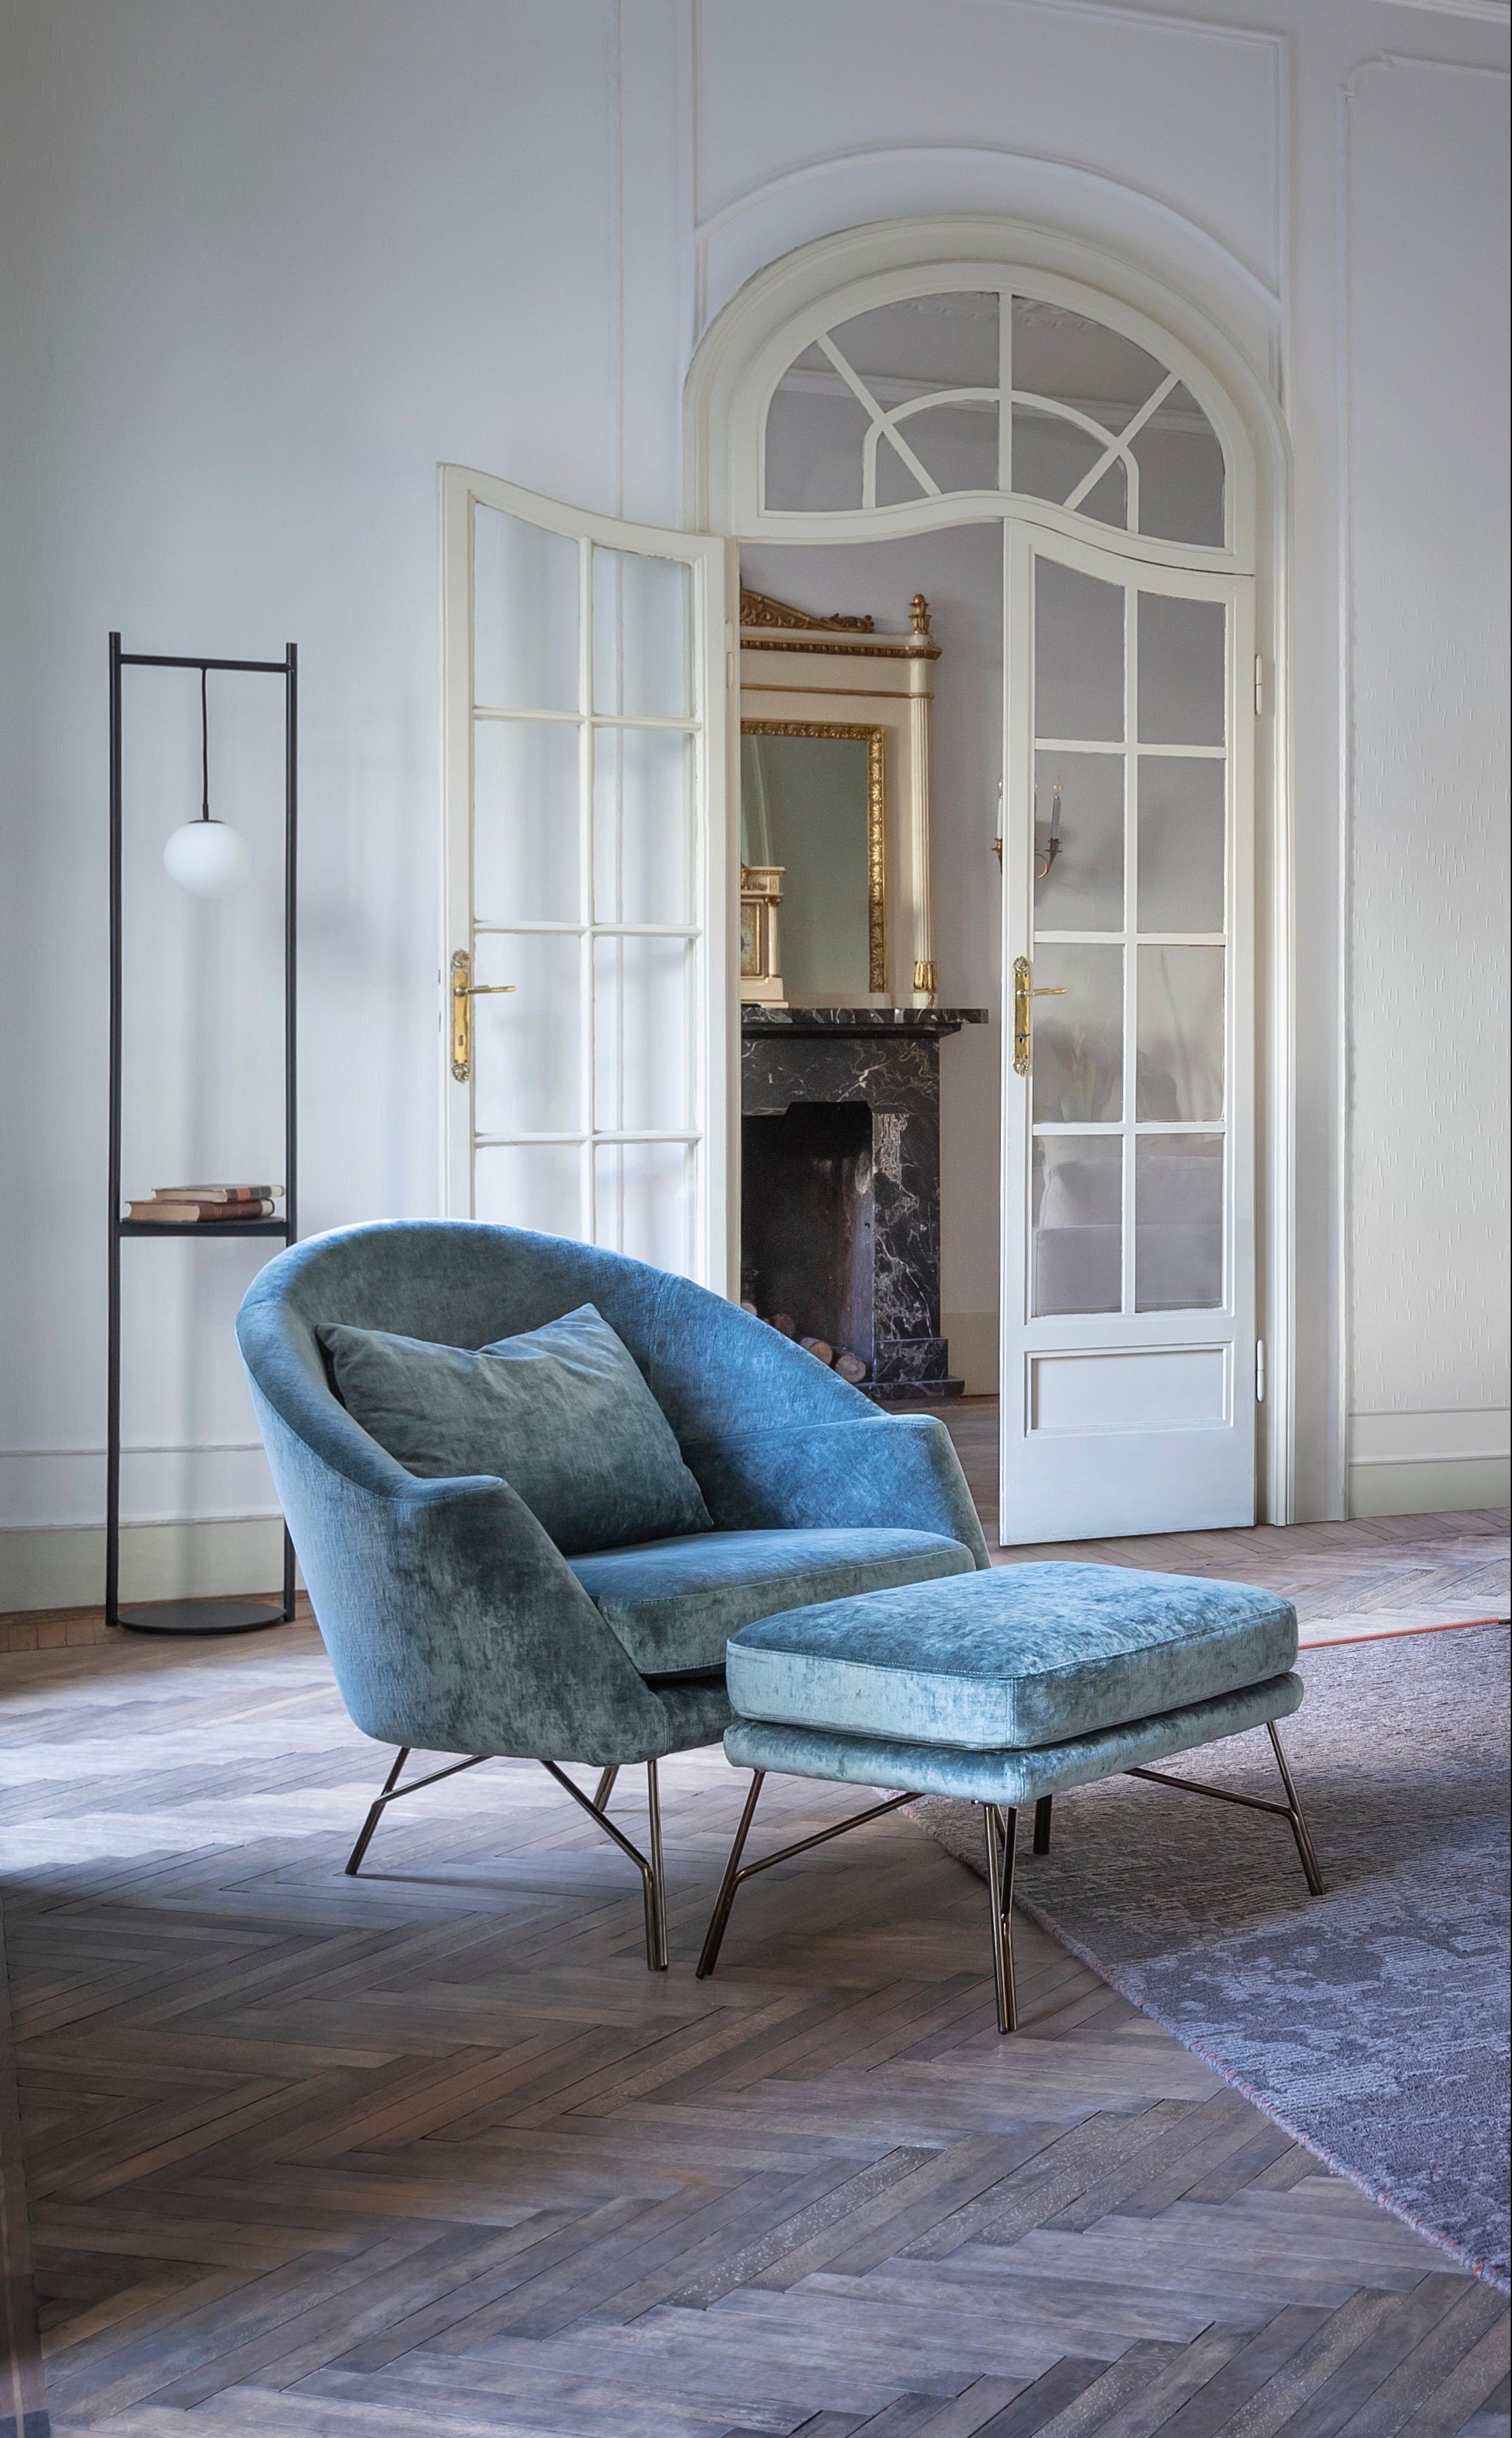 As soothing as background music, Chillout explores the new design trend that recreates old classics with a modern twist. Designed by Giuseppe Viganò, this piece of furniture draws its inspiration from a laid-back living area, whilst its slinky shape